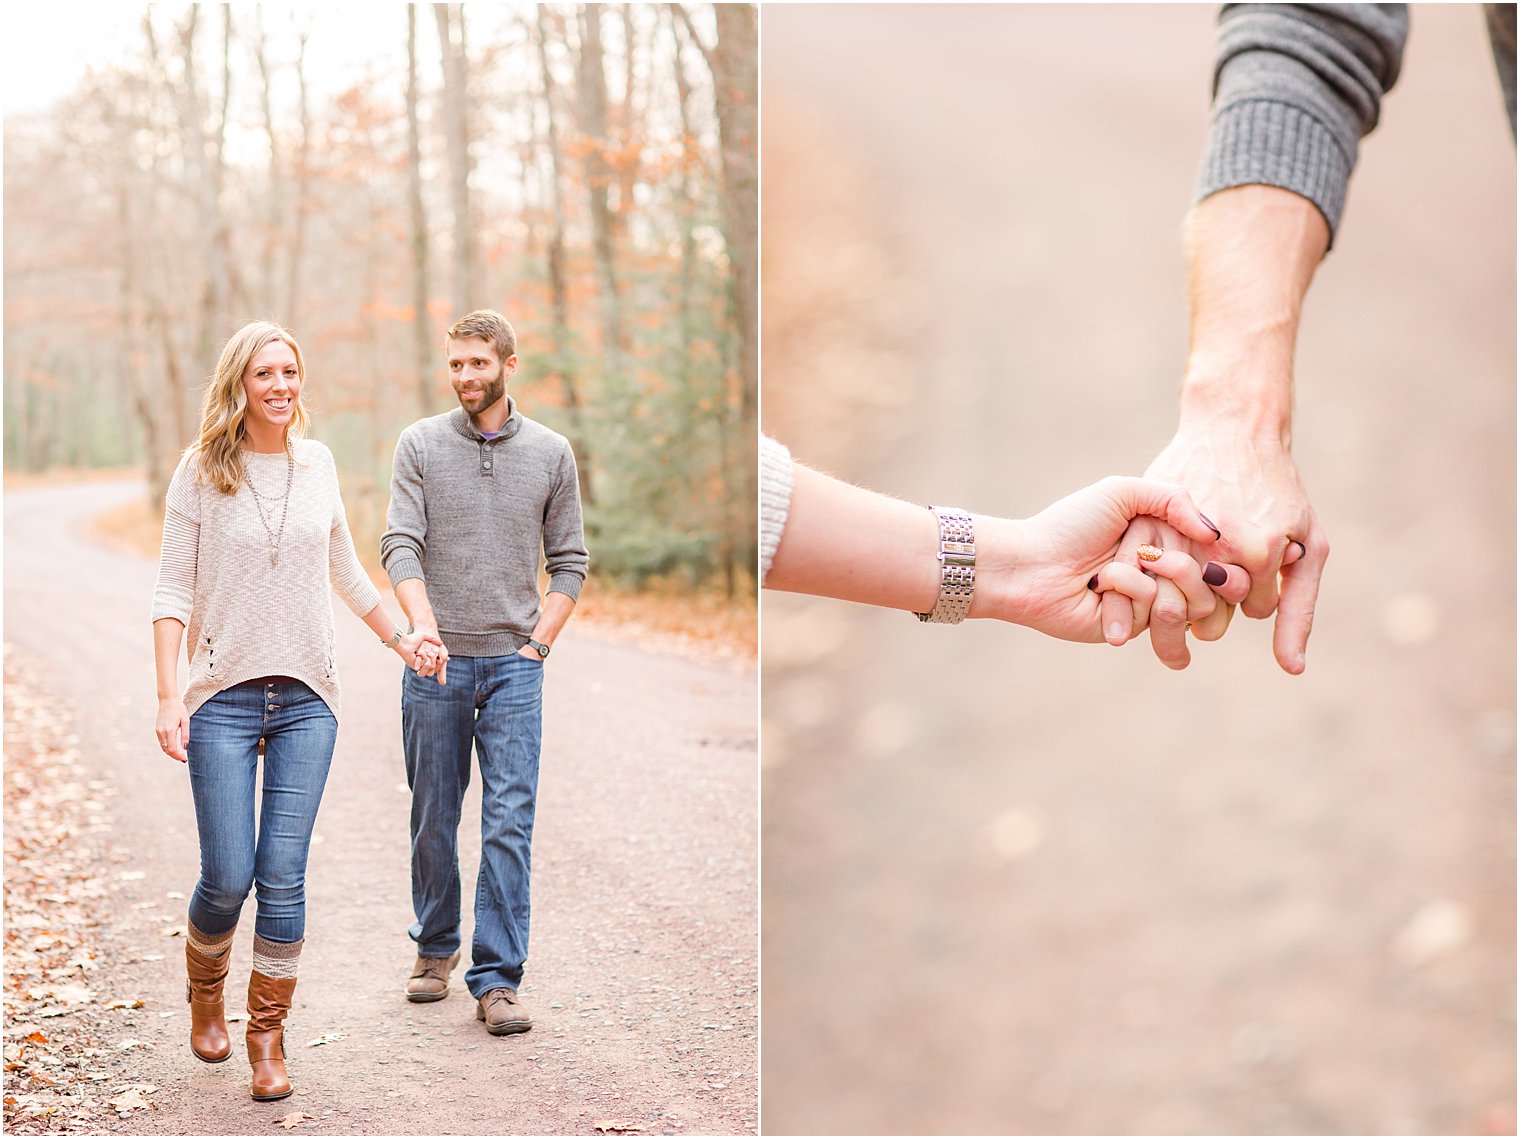 Engagement photos at Hickory Run State park